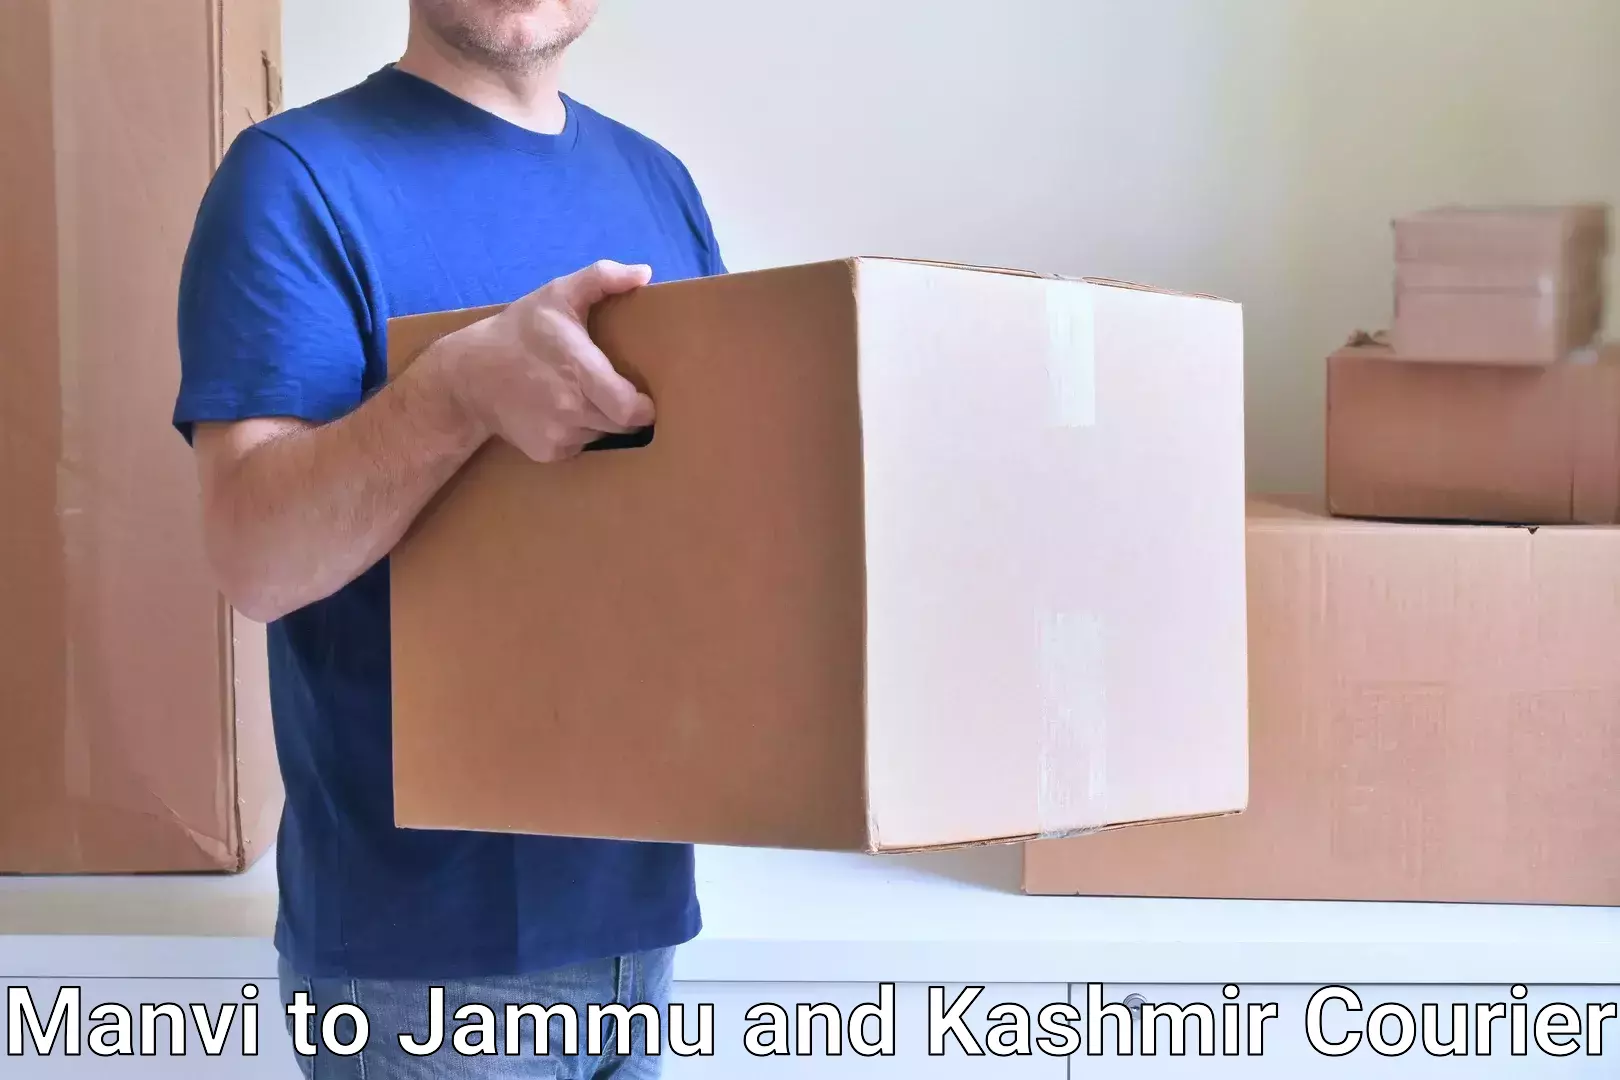 Global shipping networks Manvi to Jammu and Kashmir